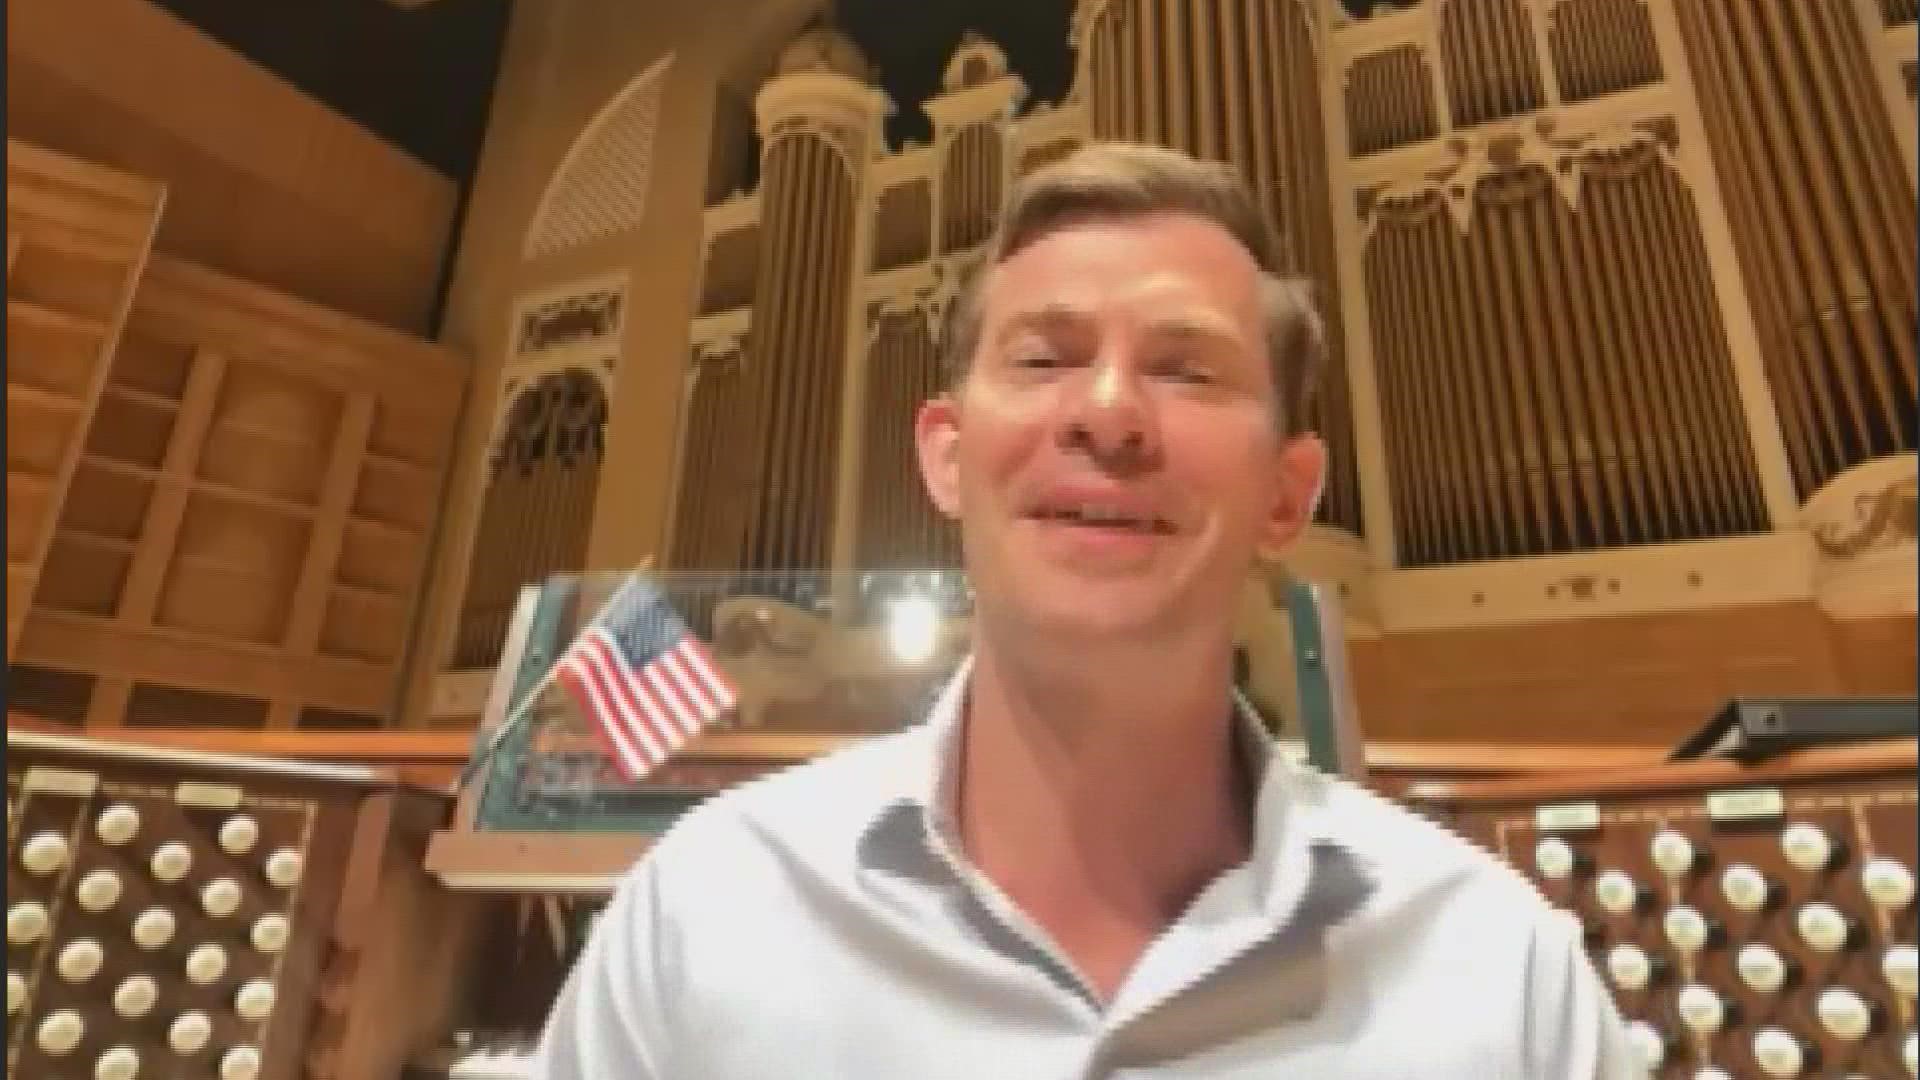 James Kennerley will be performing patriotic music on the Kotzschmar Organ on Saturday, August 21.